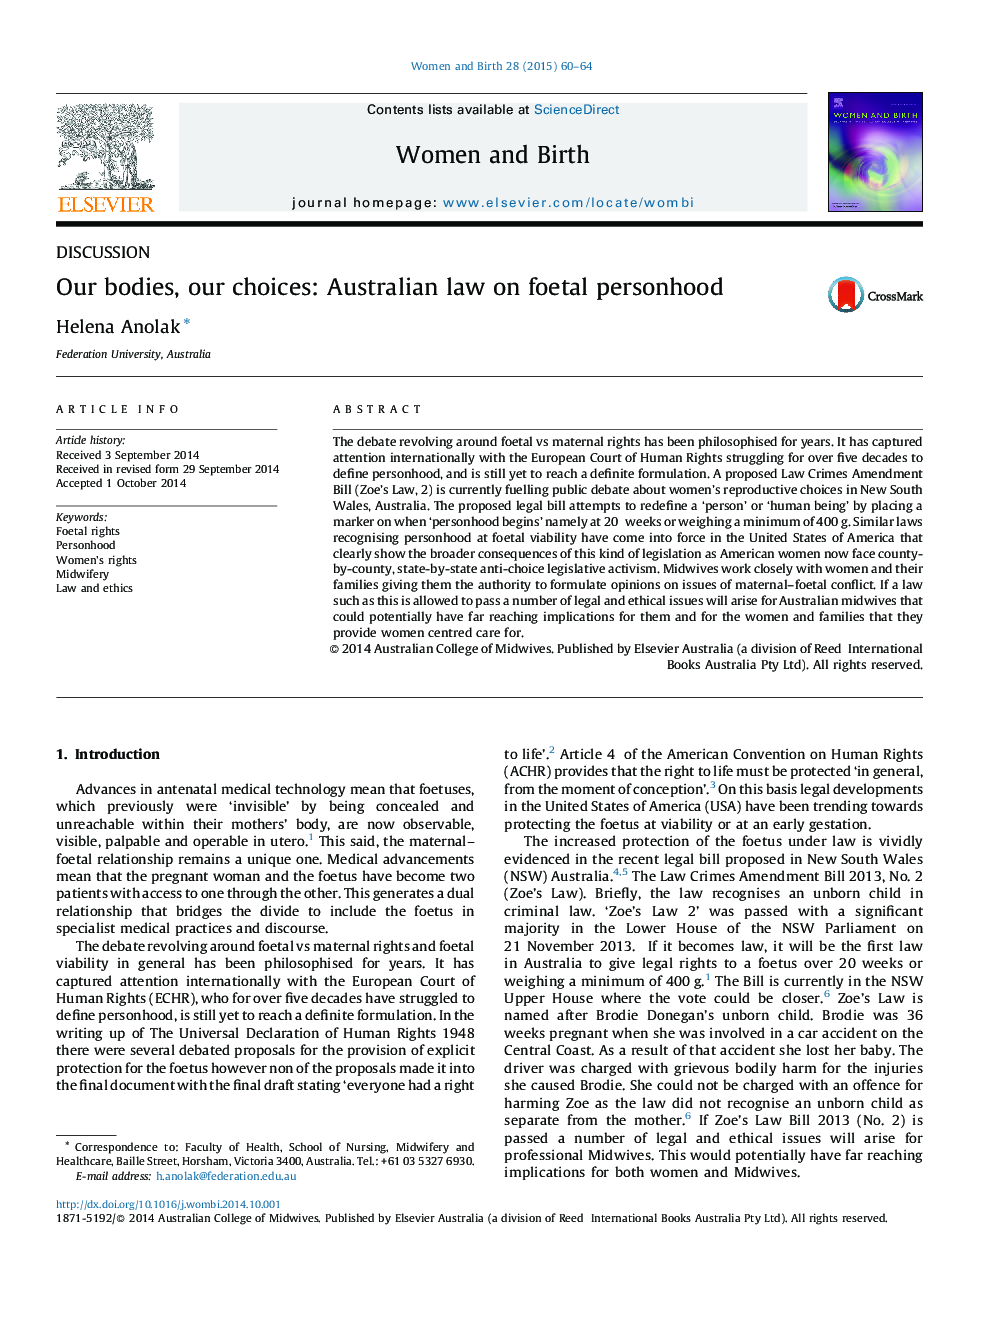 Our bodies, our choices: Australian law on foetal personhood